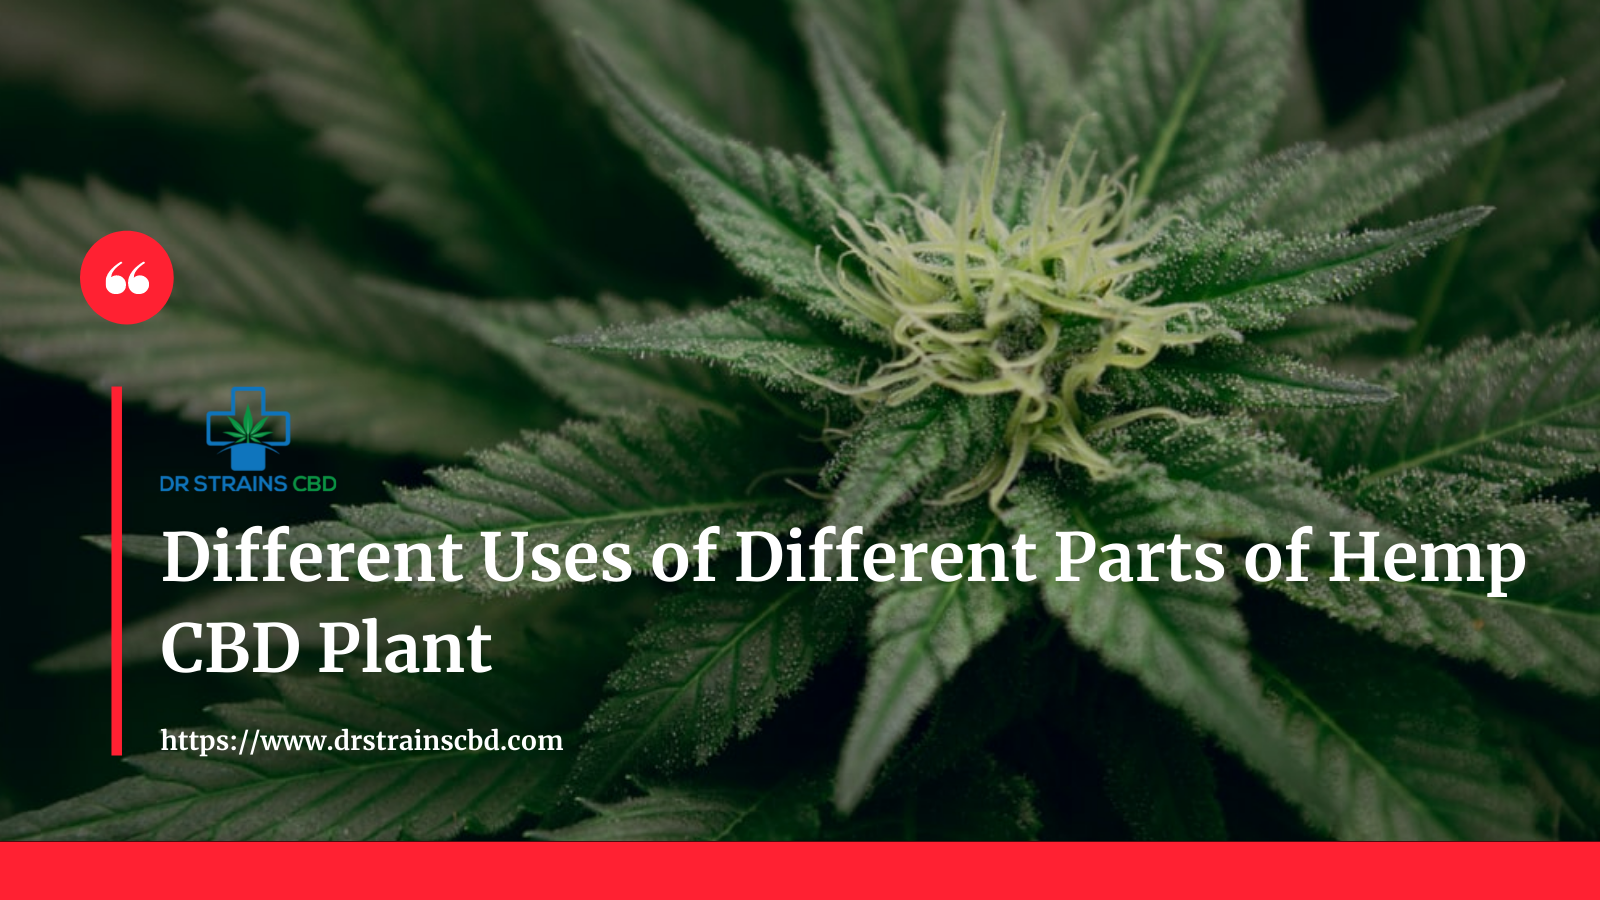 Different Uses of Different Parts of Hemp CBD Plant